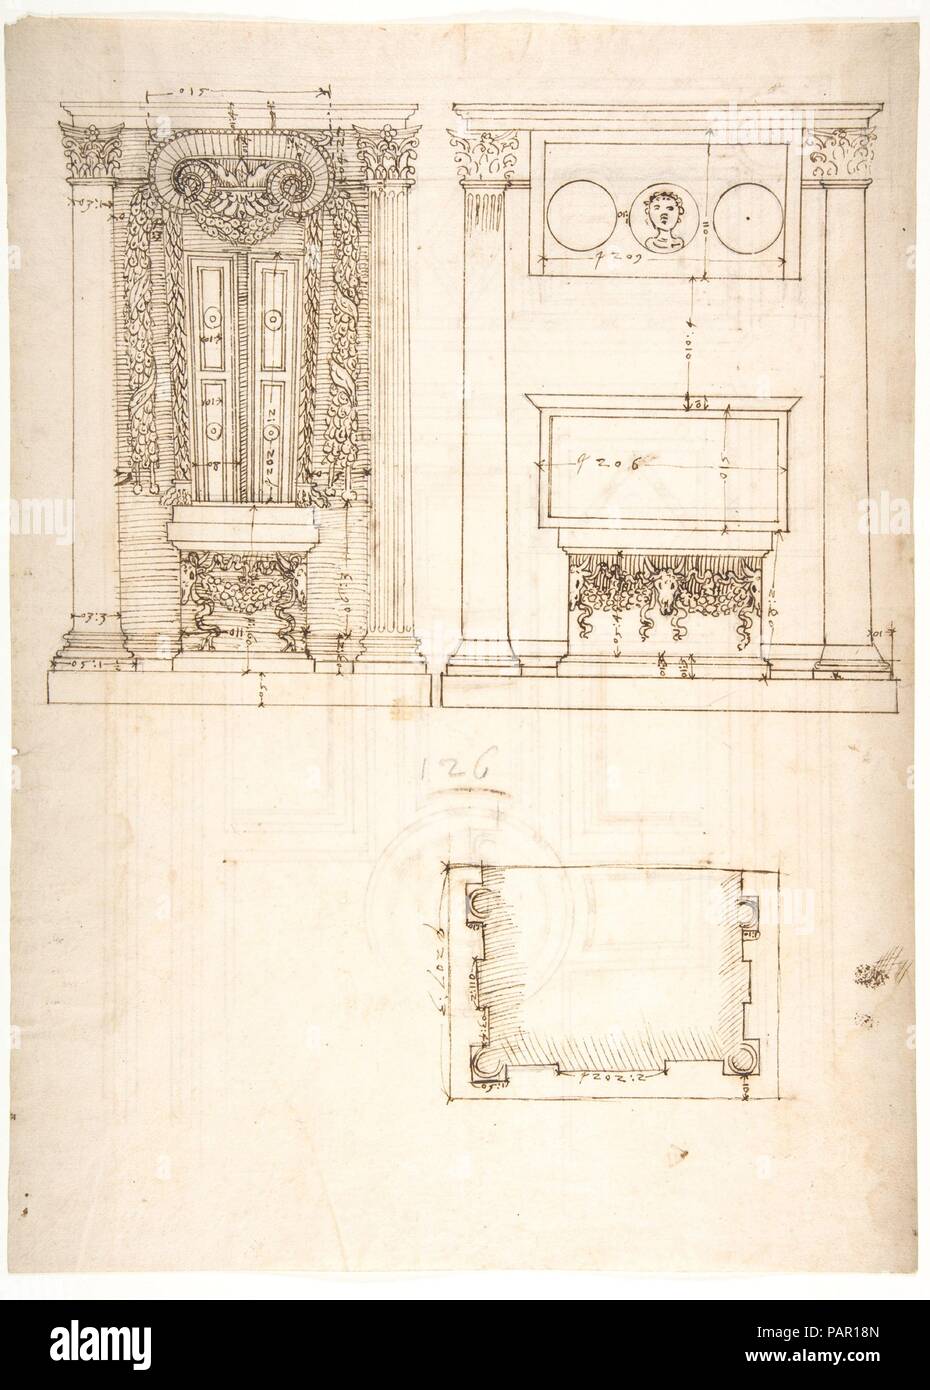 Unidentified, funerary altar, plan and elevations (recto) S. Giovanni Laterano, Oratorio della Santa Croce, paneling, elevation (verso). Dimensions: sheet: 15 3/8 x 11 1/8 in. (39 x 28.3 cm). Draftsman: Drawn by Anonymous, French, 16th century. Series/Portfolio: Goldschmidt Scrapbook. Date: early to mid-16th century. Museum: Metropolitan Museum of Art, New York, USA. Stock Photo